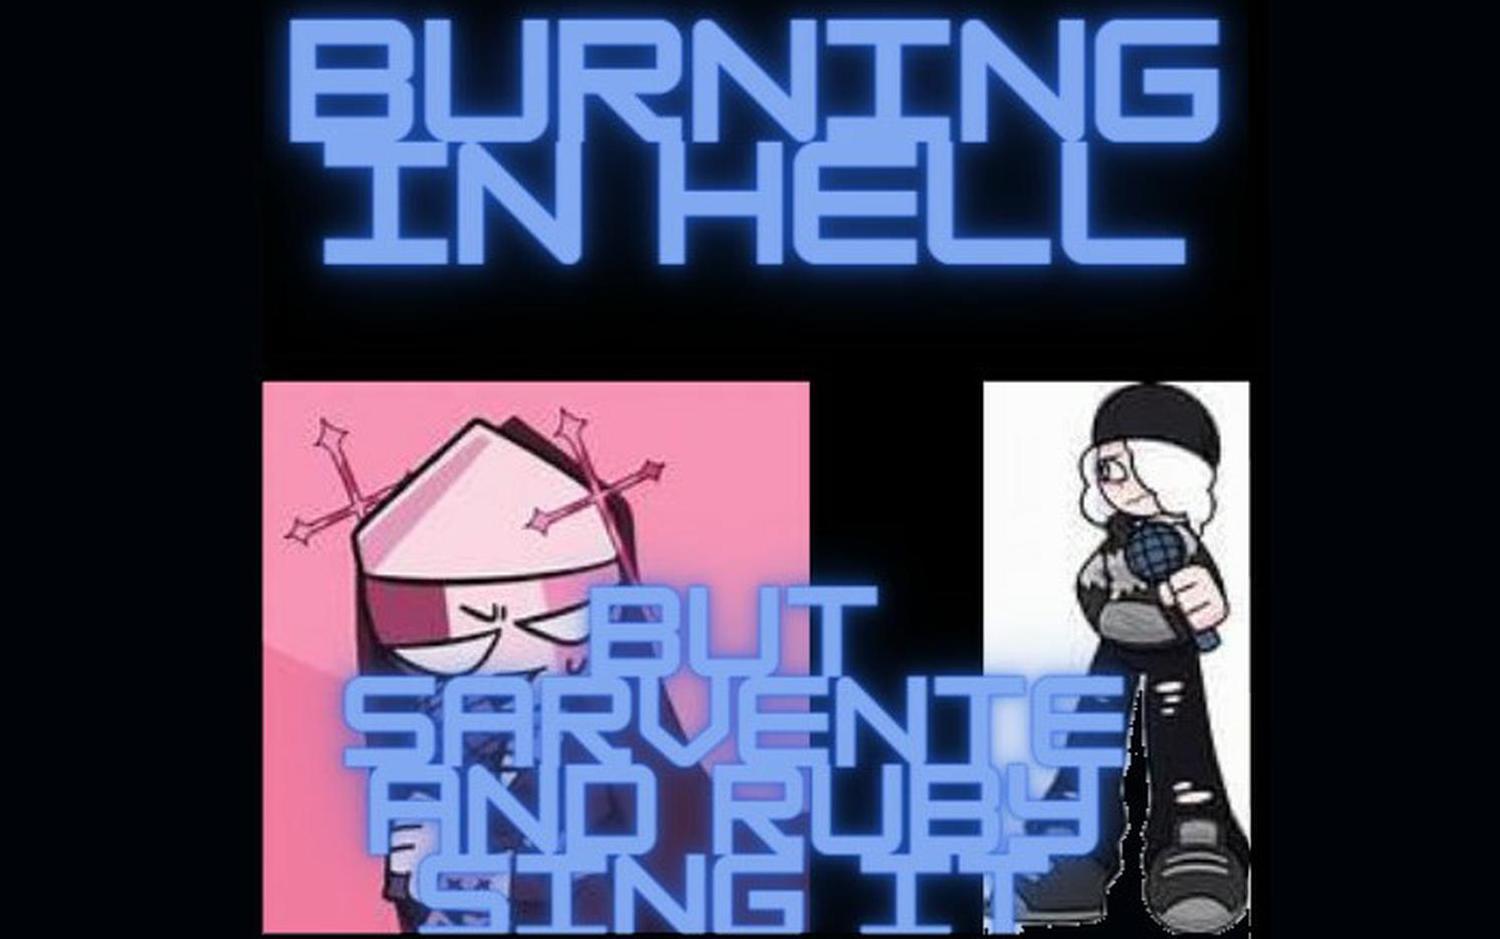 Burning In Hell but Sarvente and Ruby Sing It